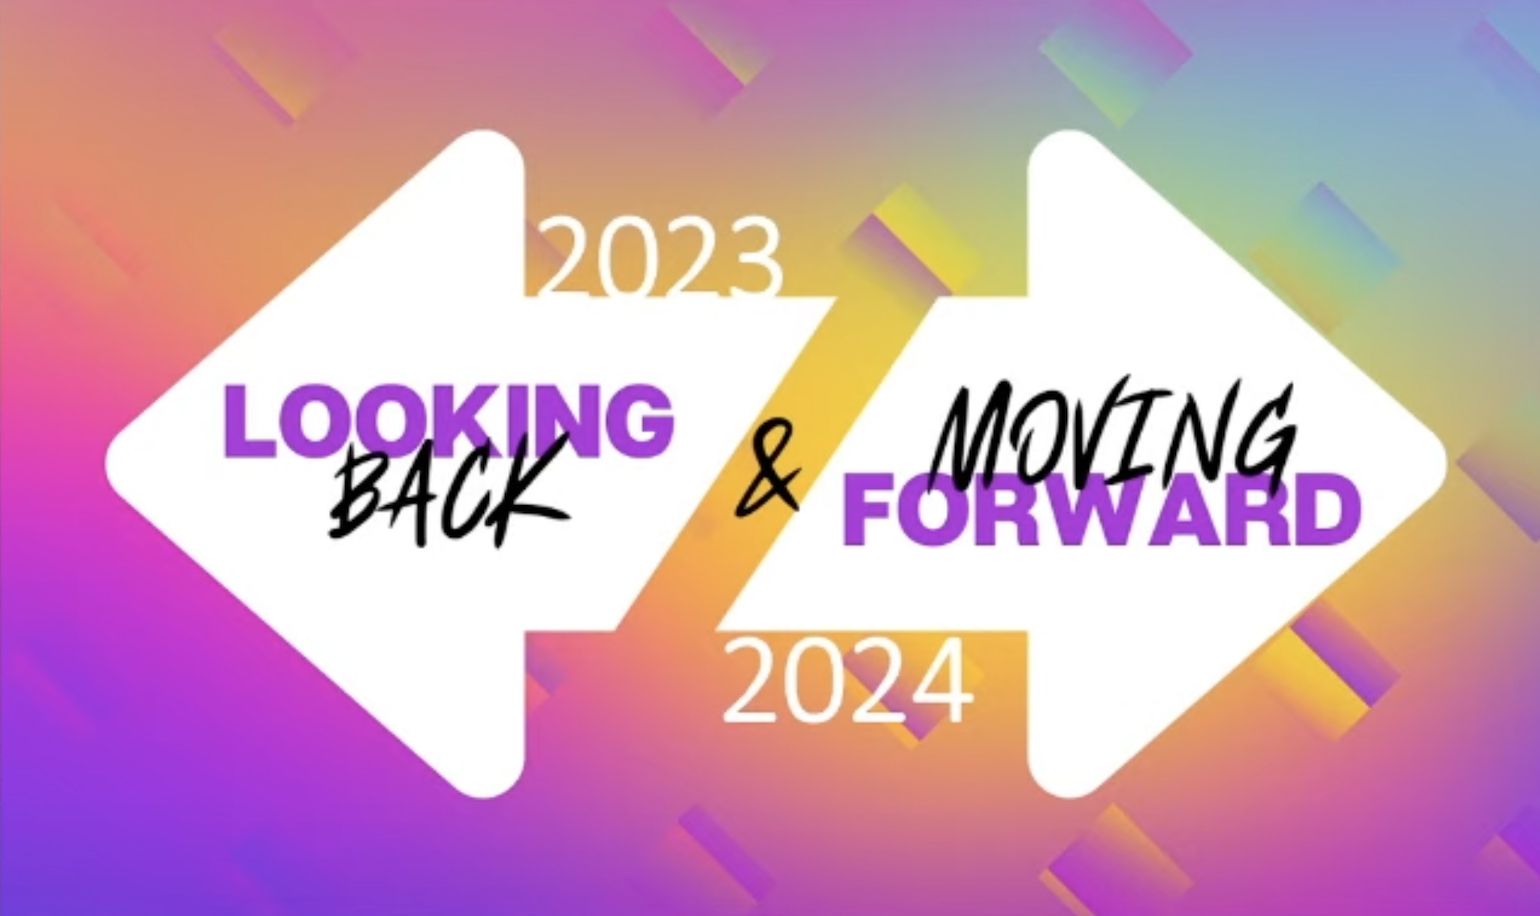 Looking Back at 2023 and Moving Forward to 2024